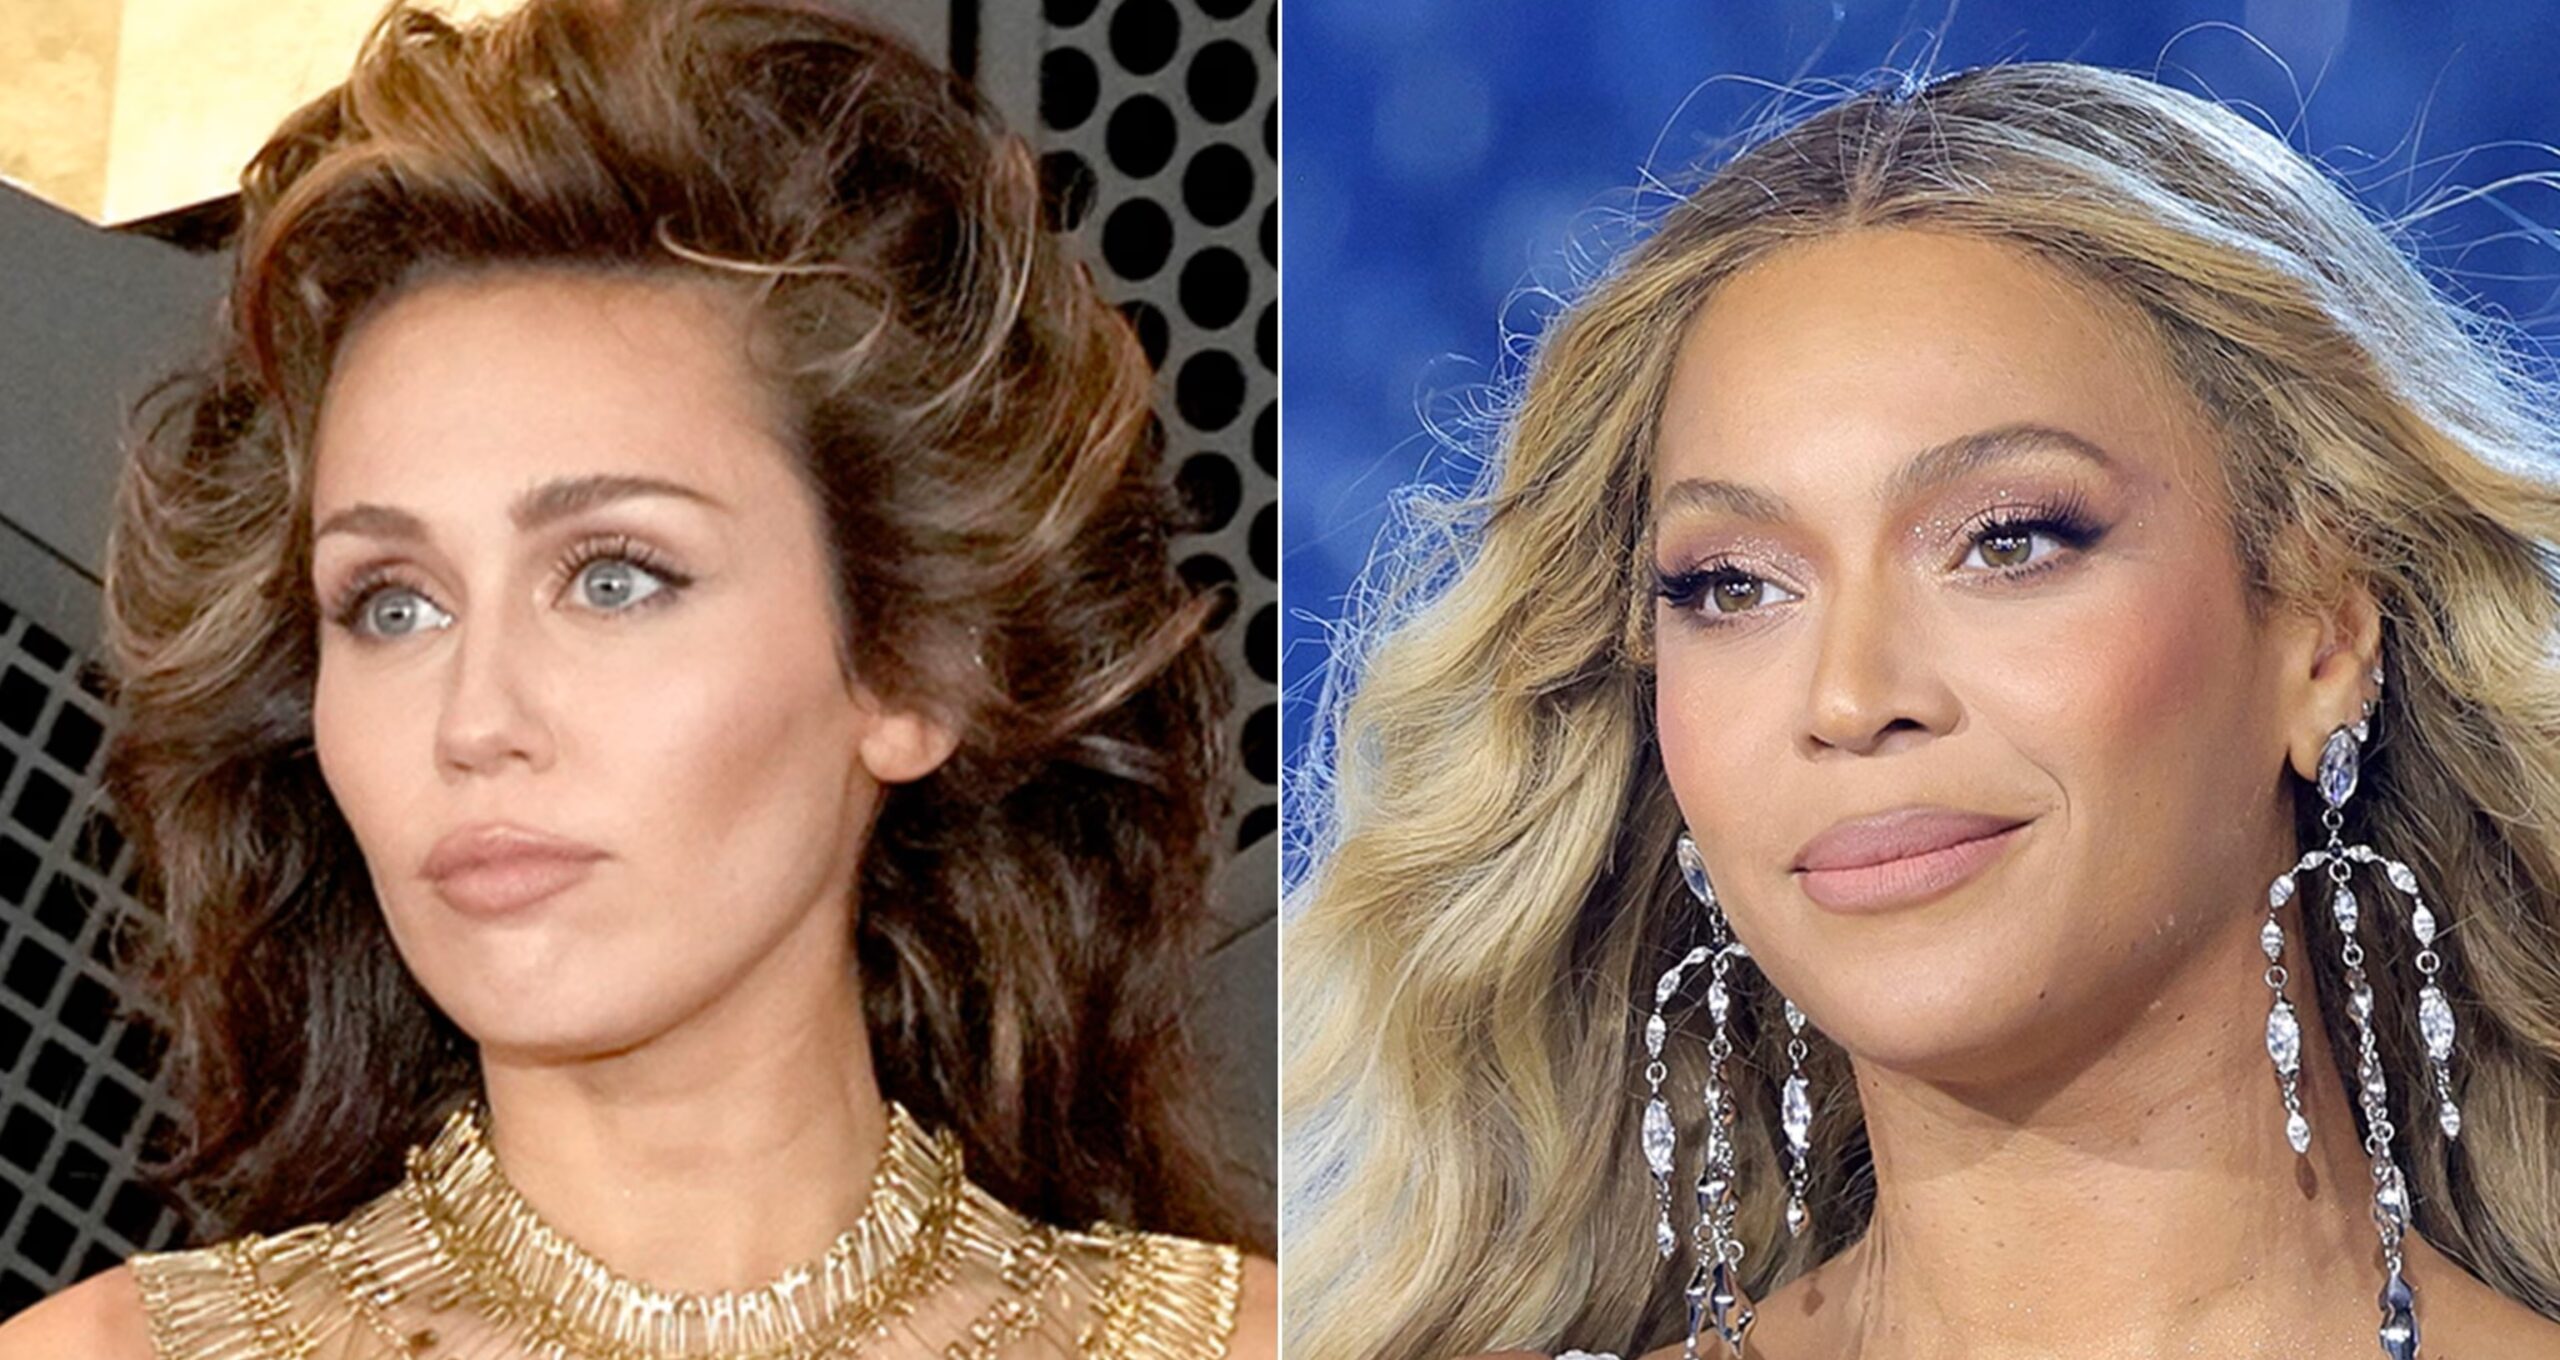 Beyonce Or Miley Cyrus – Who Did A Better Cover Of Dolly Parton’s Jolene? Vote Here!